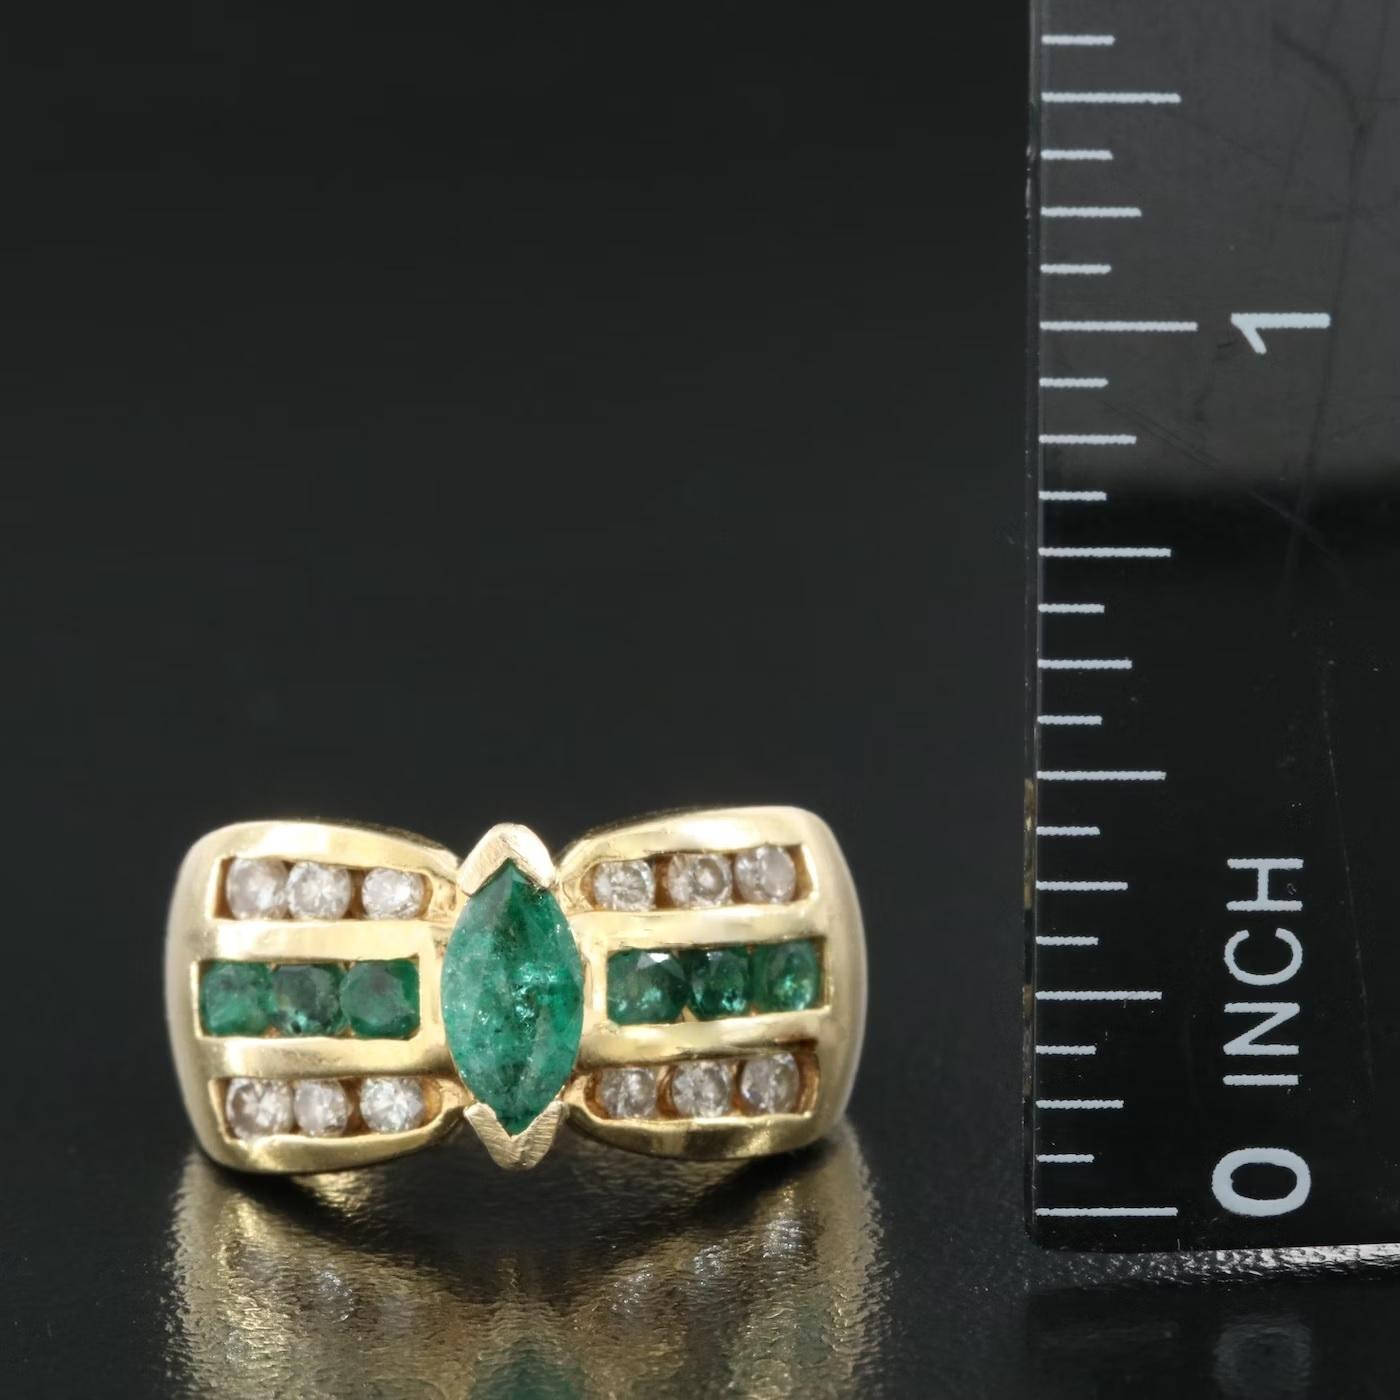 EFFY designer ring, stamped and hallmarked

Diamond & Natural Emerald

14K Yellow gold, stamped 14K

The ring is size 6.25 US size and can be re-sized by your local jeweler

Comes with EFFY gift box.

Vintage item